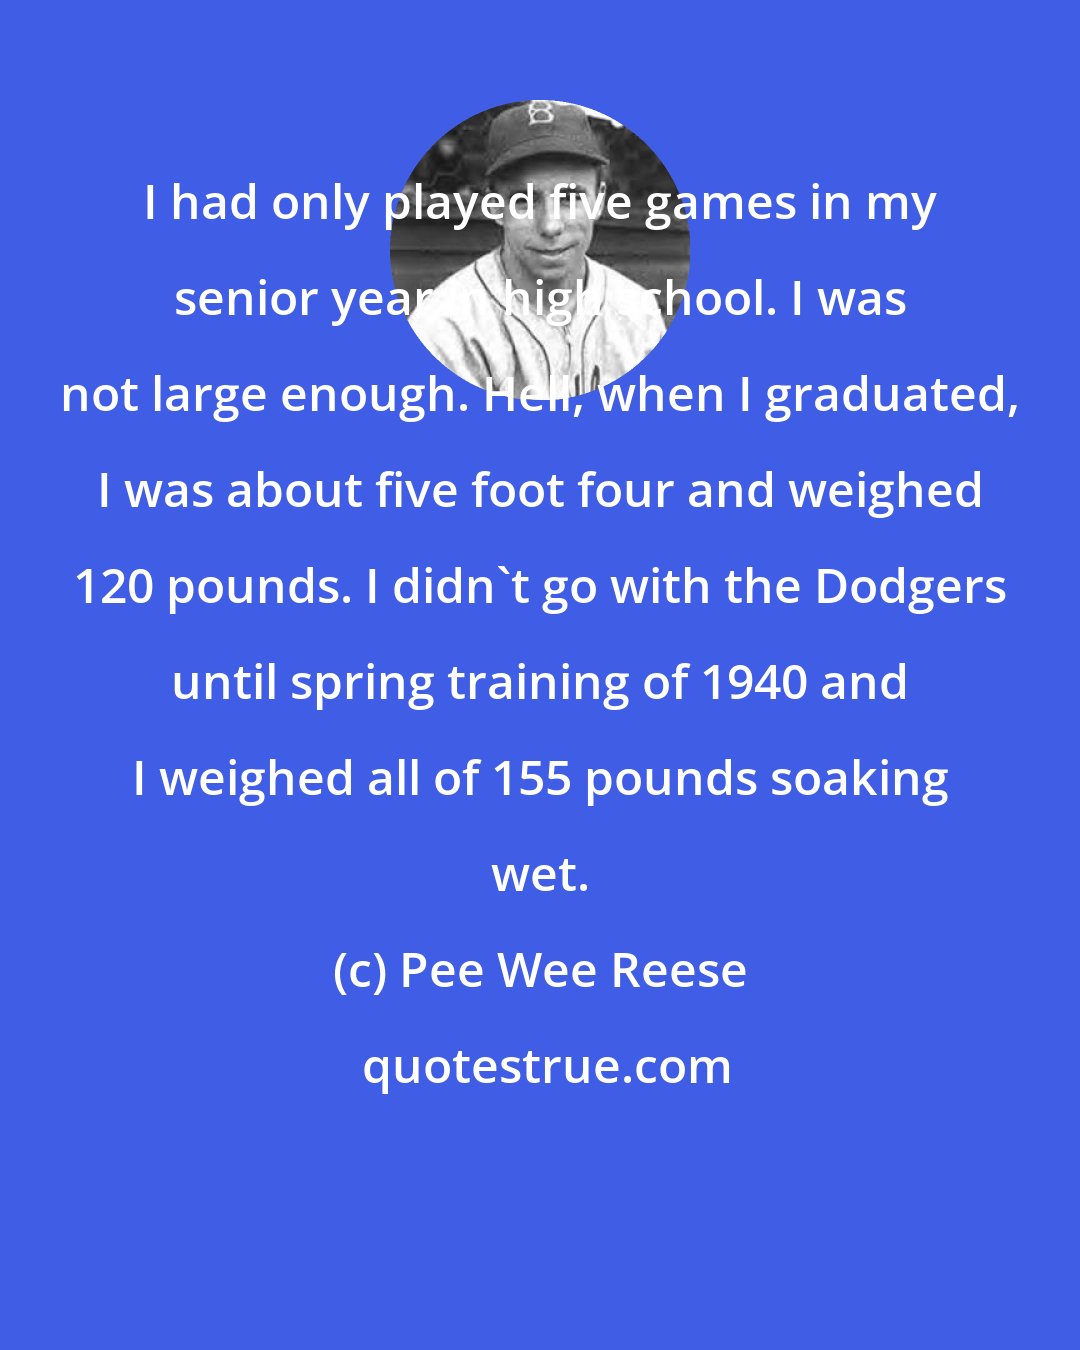 Pee Wee Reese: I had only played five games in my senior year in high school. I was not large enough. Hell, when I graduated, I was about five foot four and weighed 120 pounds. I didn't go with the Dodgers until spring training of 1940 and I weighed all of 155 pounds soaking wet.